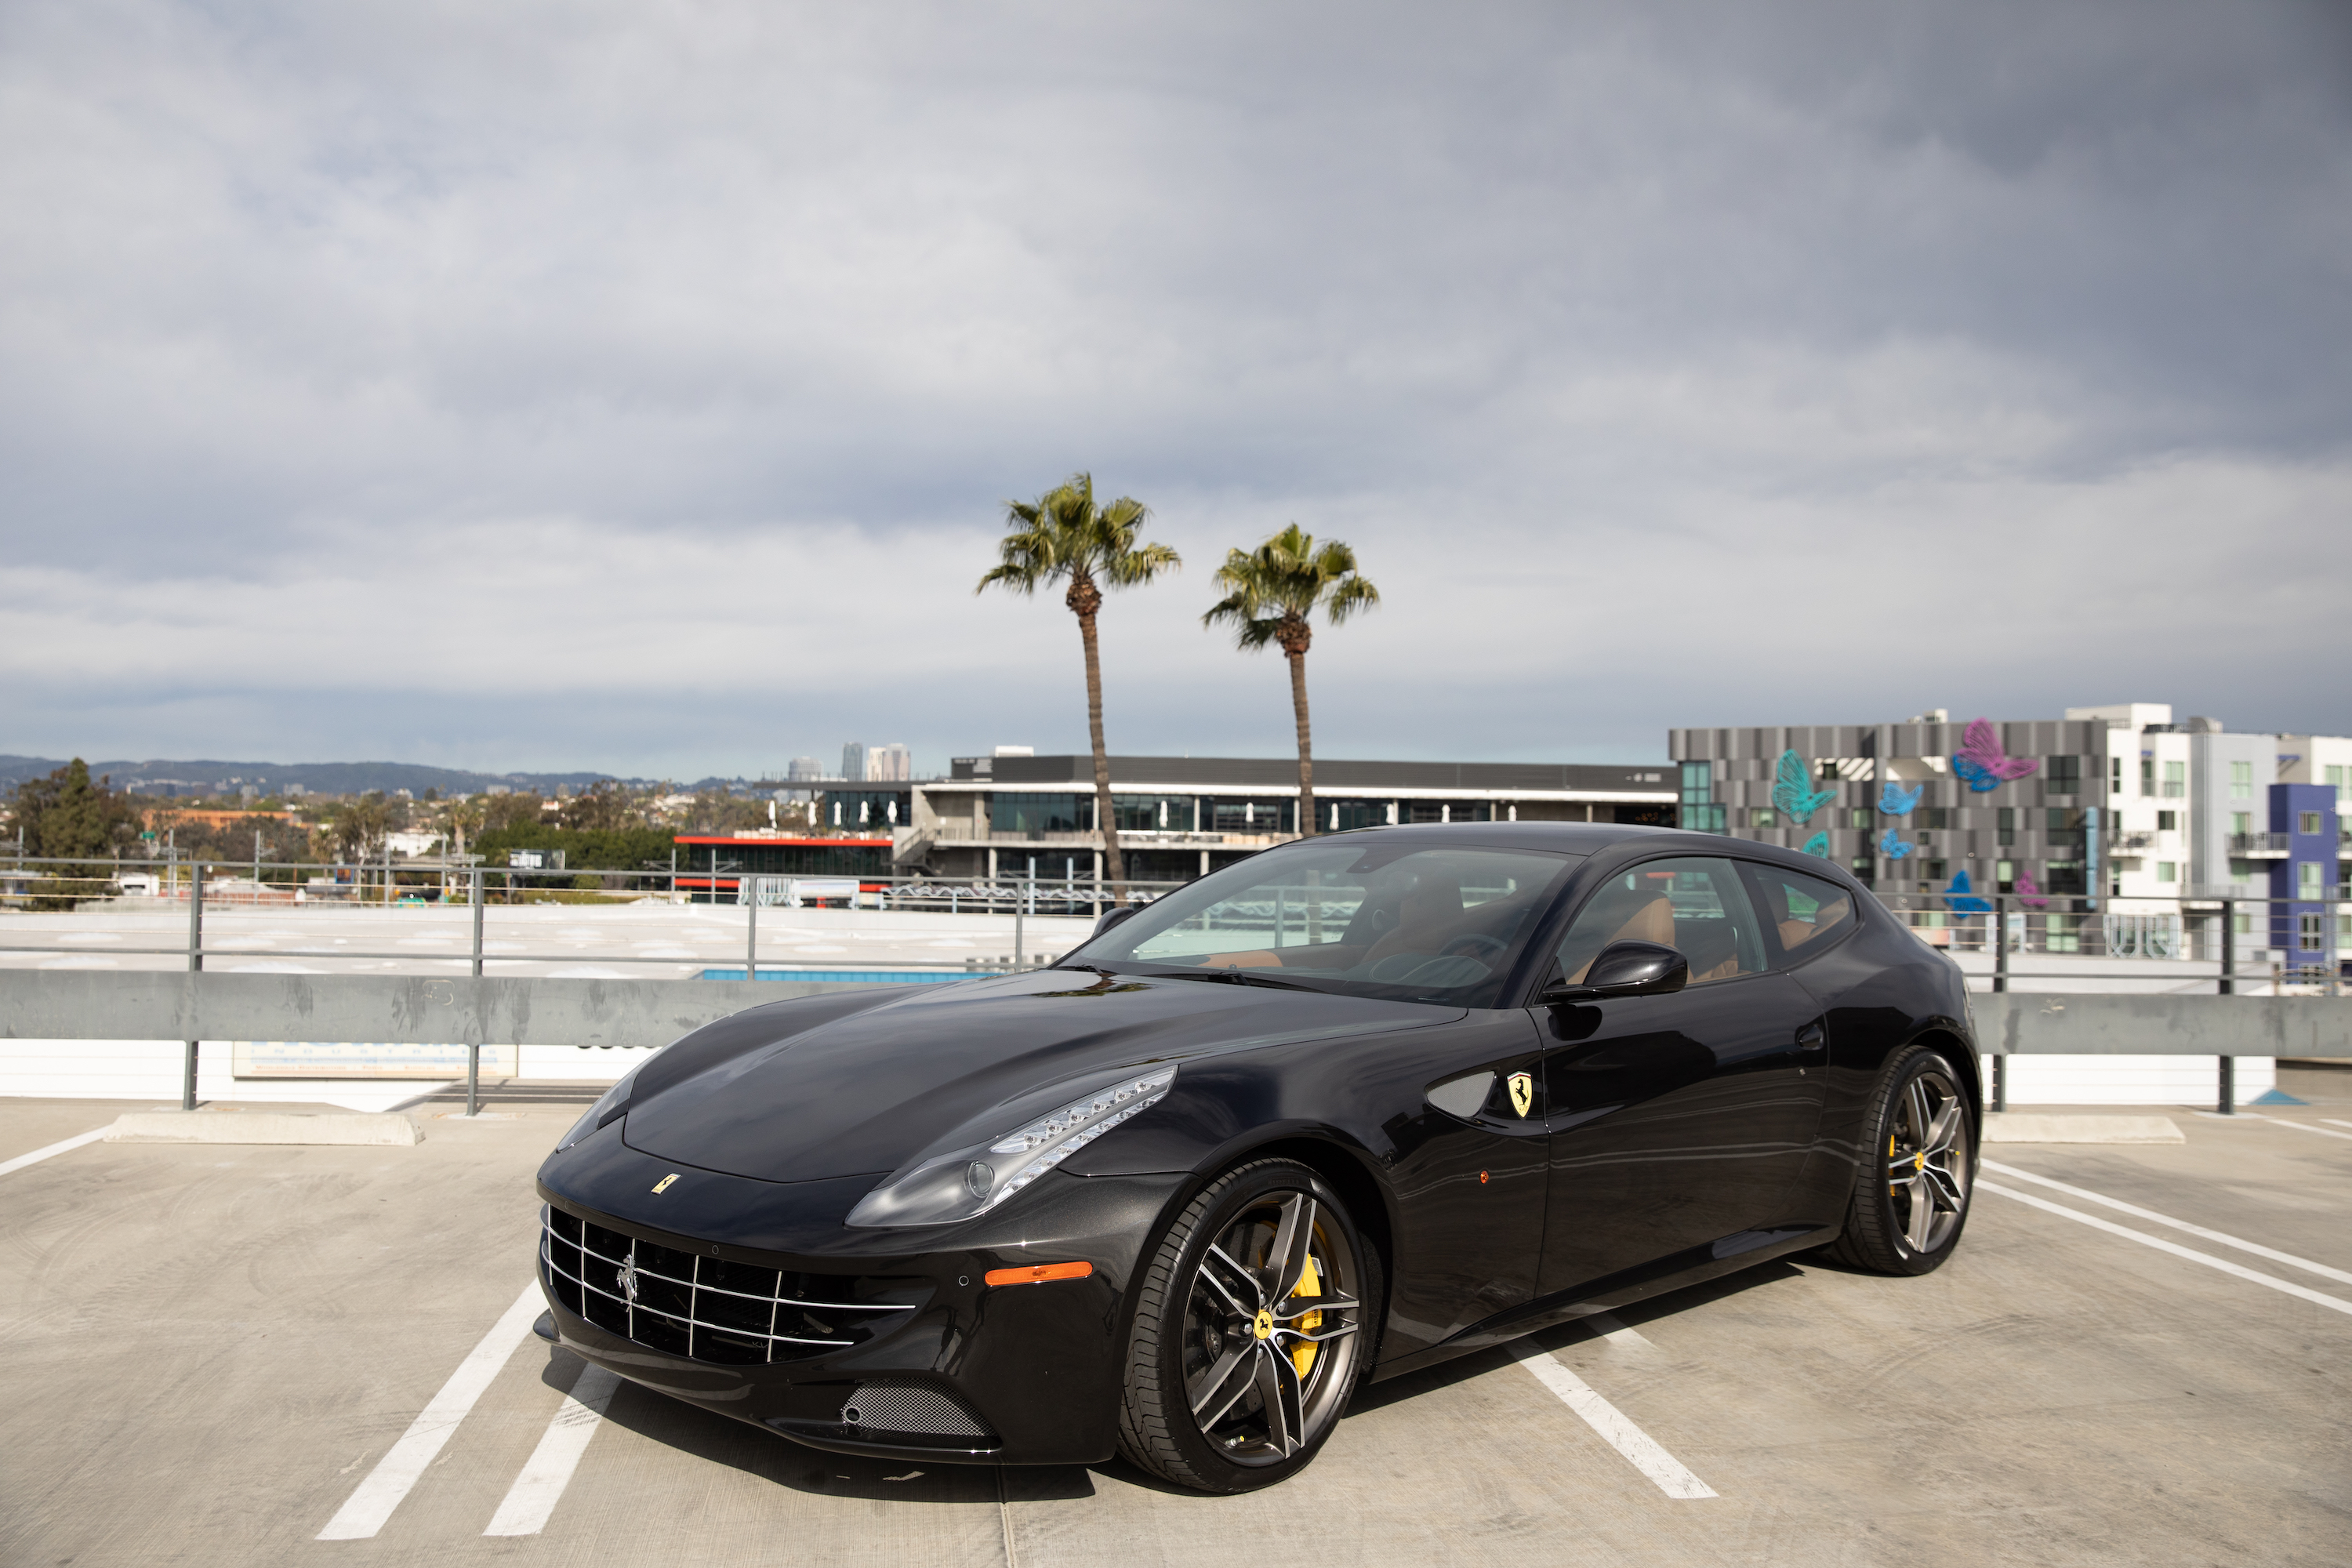 Used 2016 Ferrari FF for Sale Right Now - Autotrader